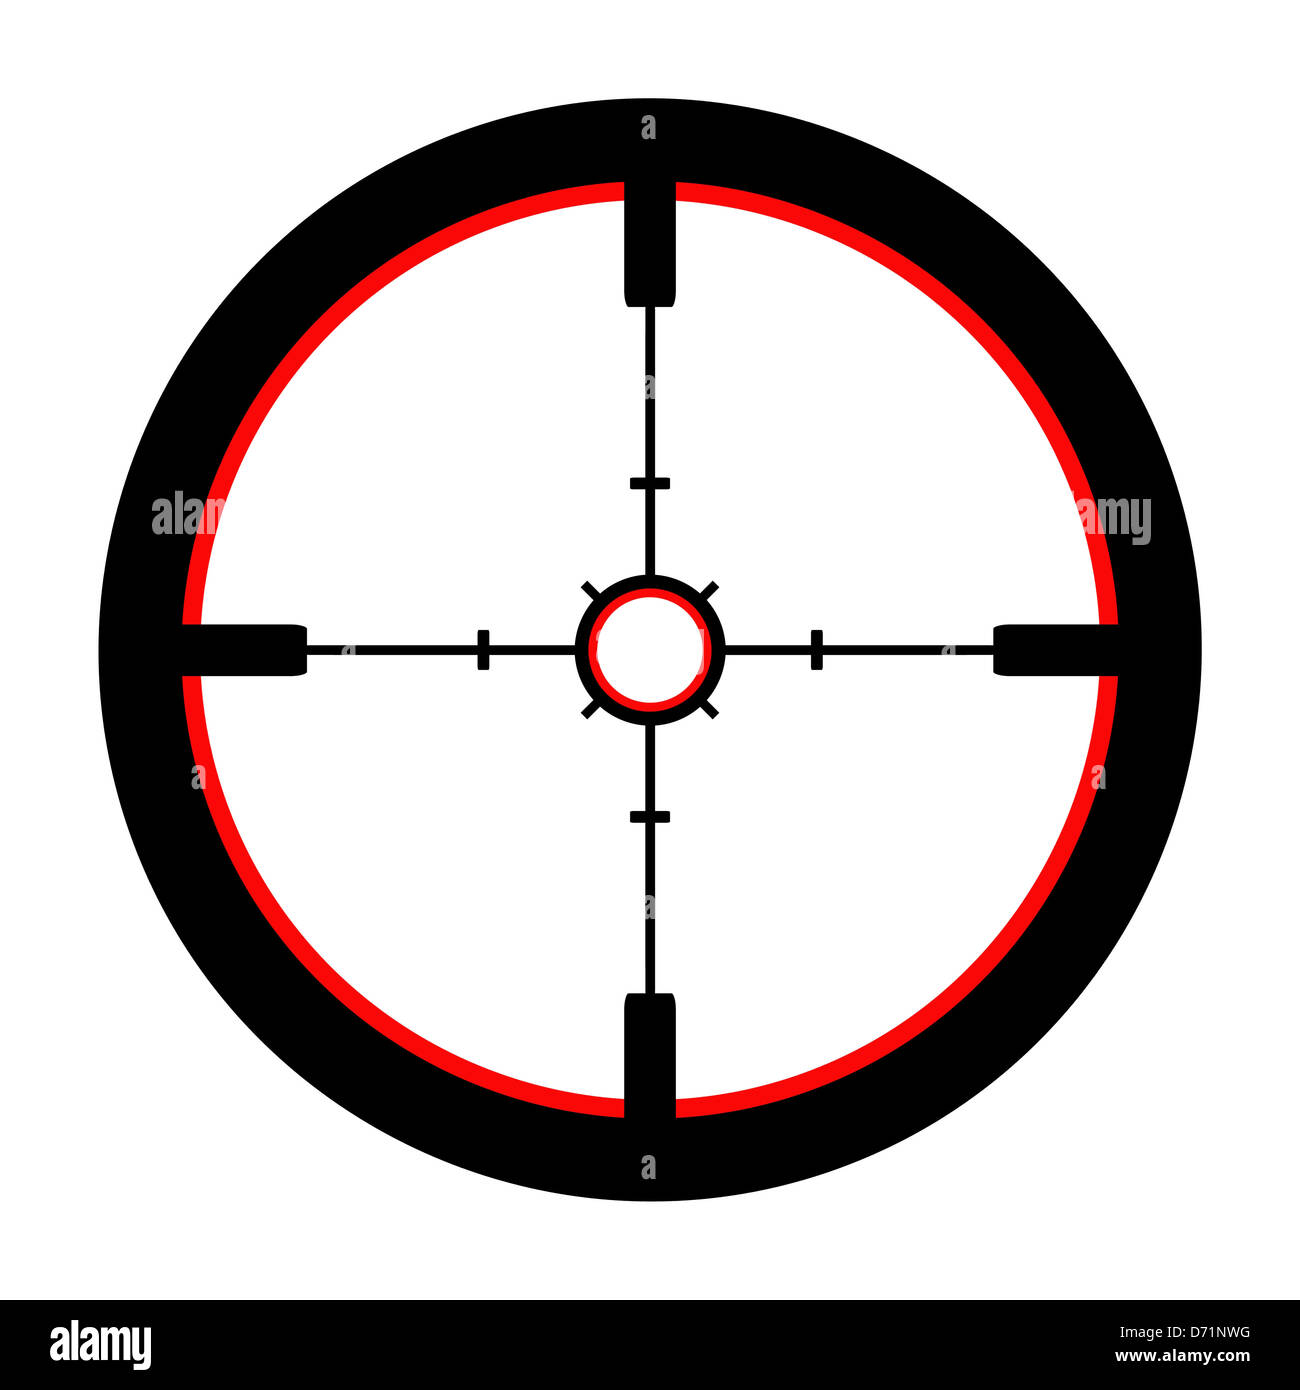 Isolated Illustration of a Crosshair Stock Photo